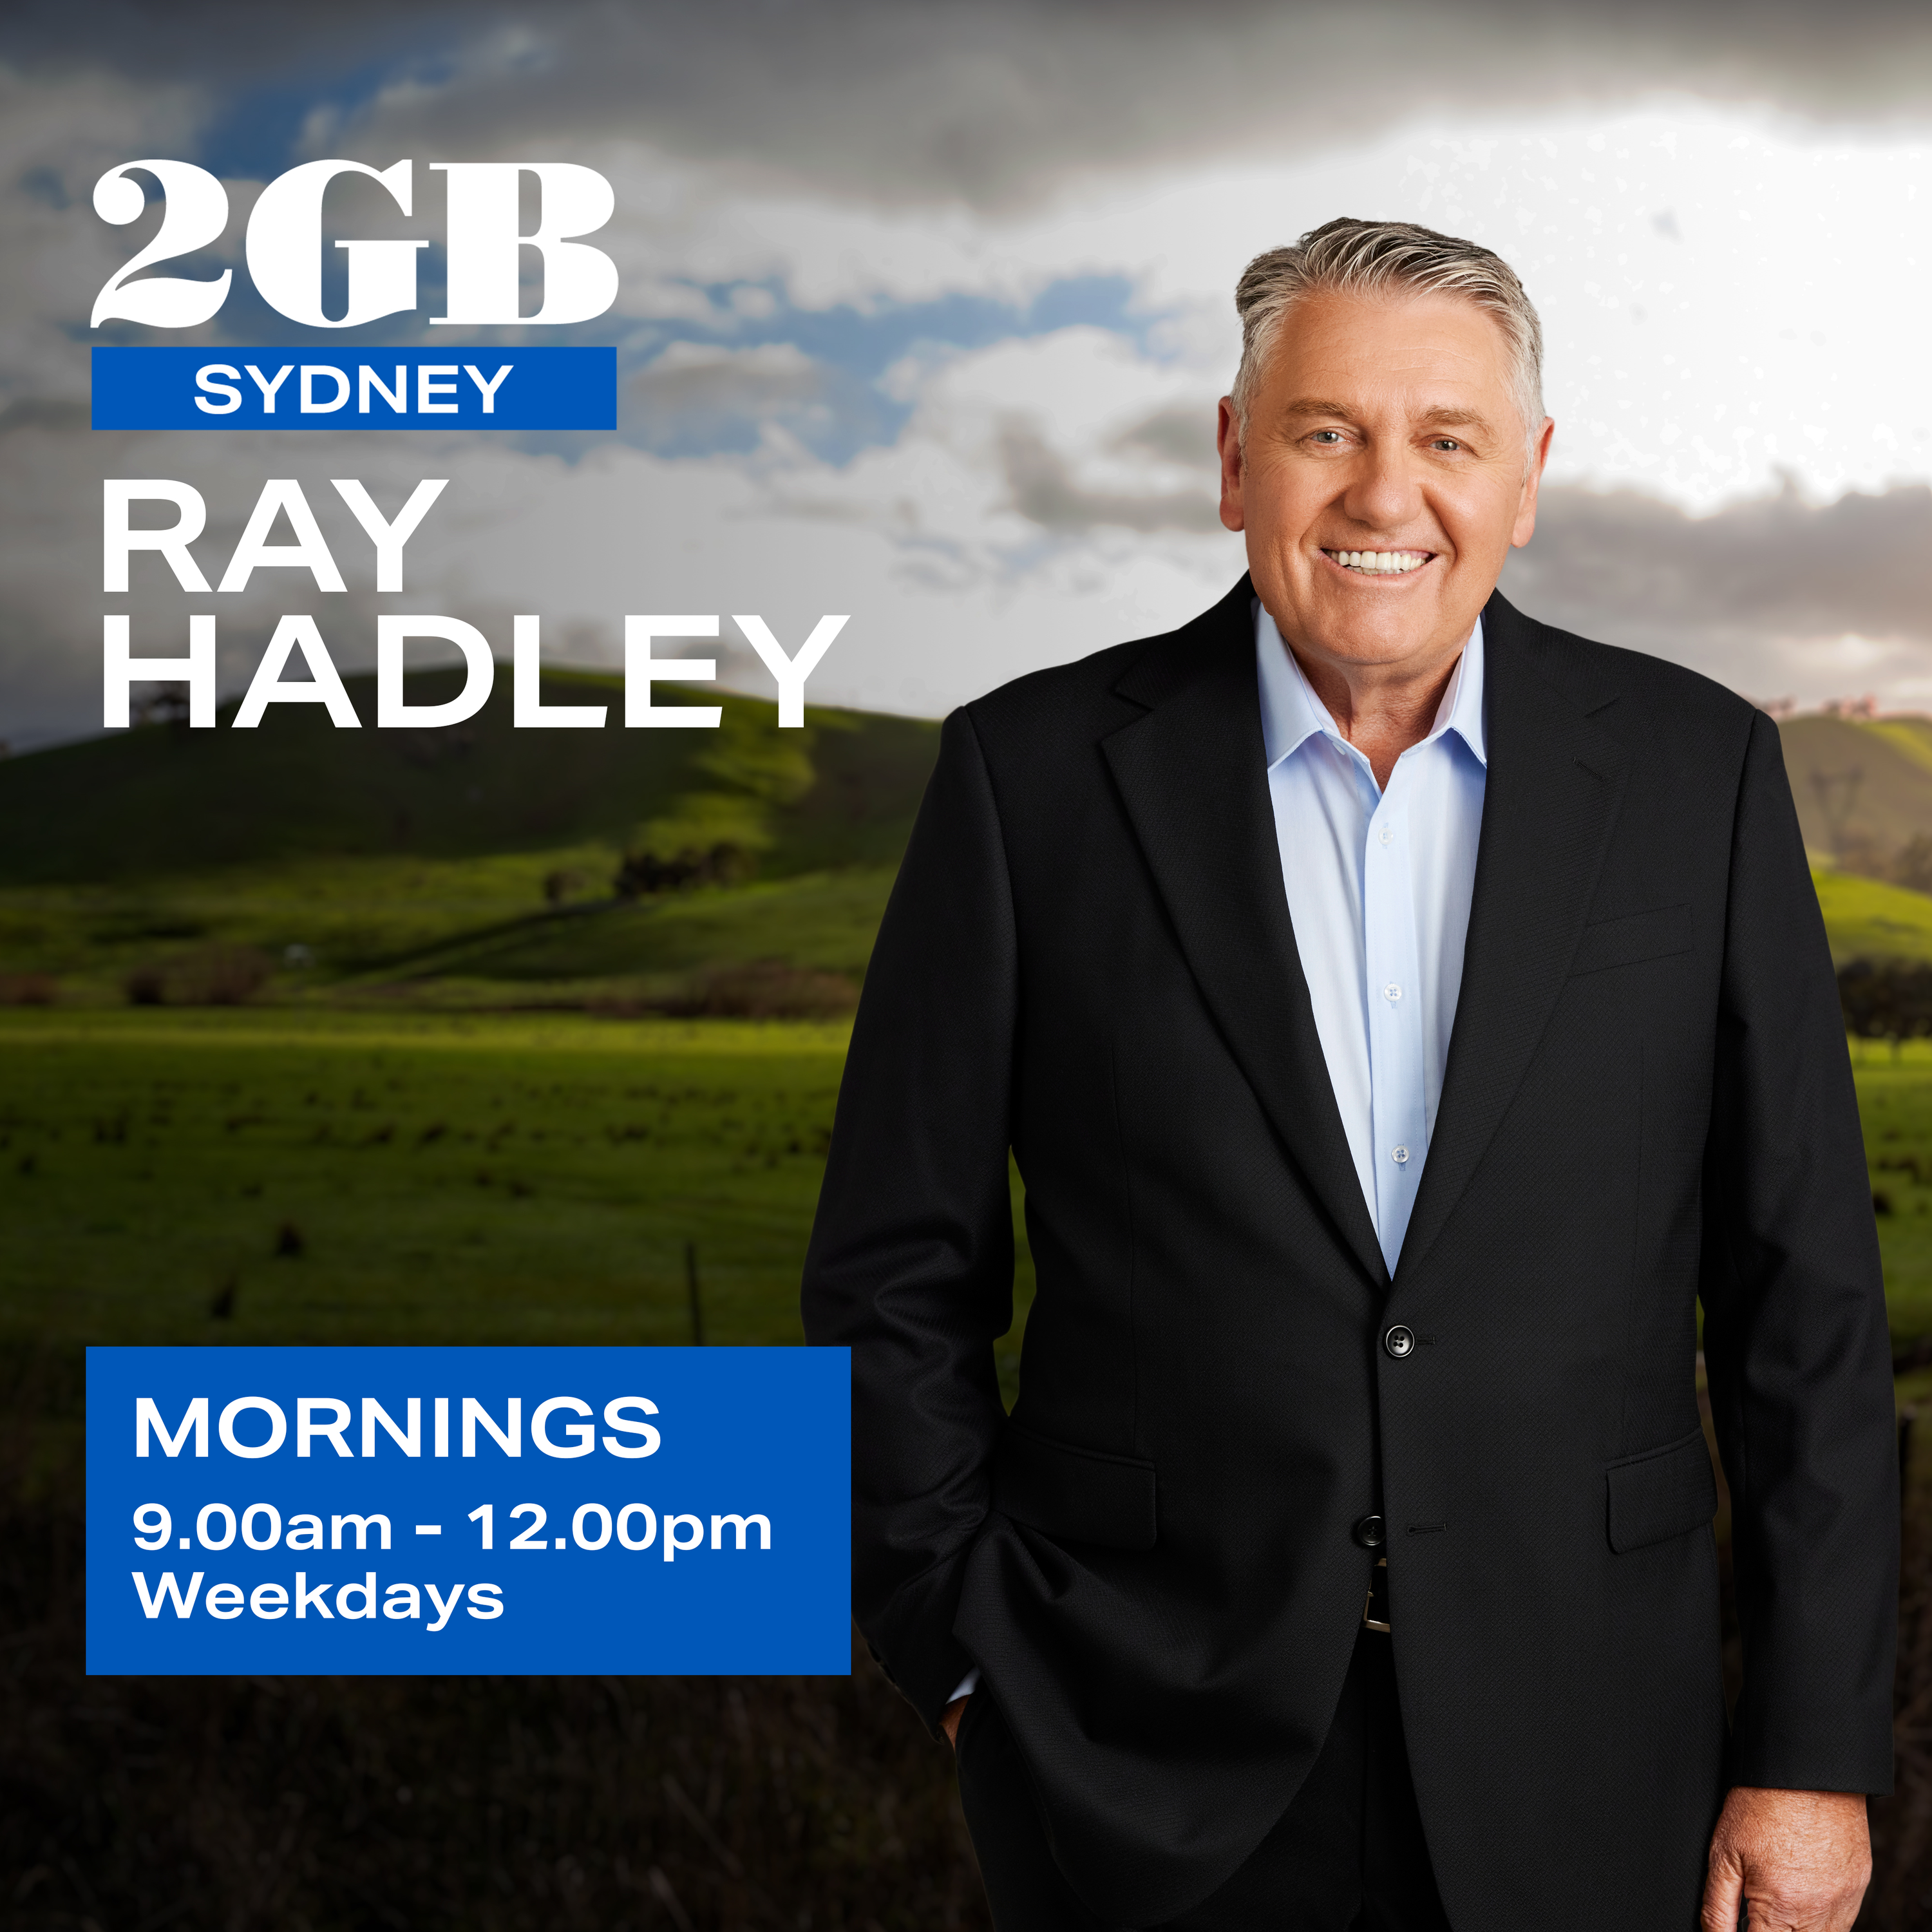 'You need one boss!': Ray Hadley calls on NSW Premier to fix flood response